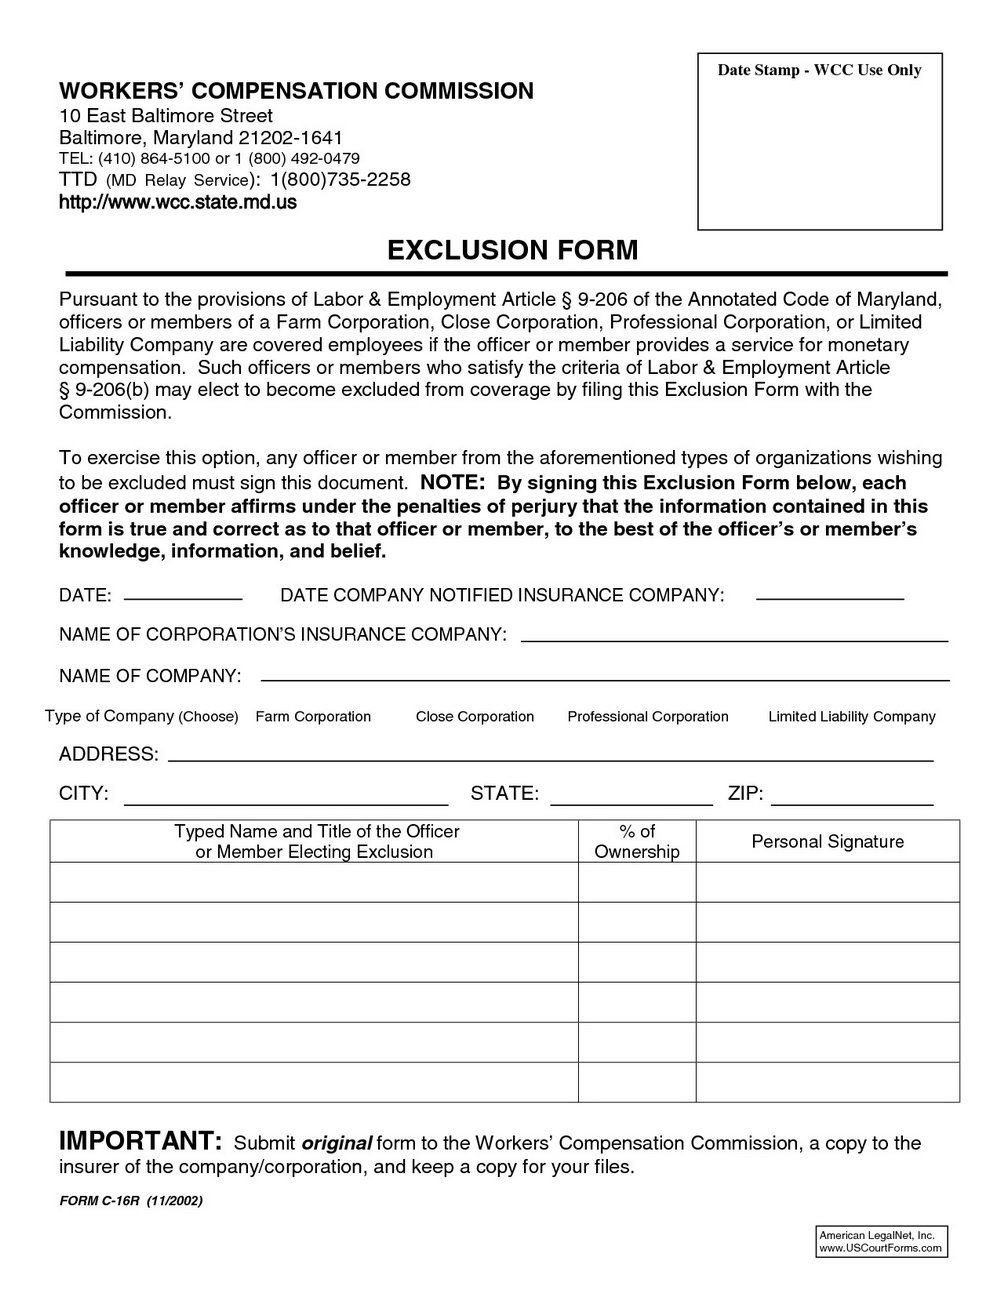 Workers Comp Waiver form Oklahoma Workers Pensation Waiver form for Independent